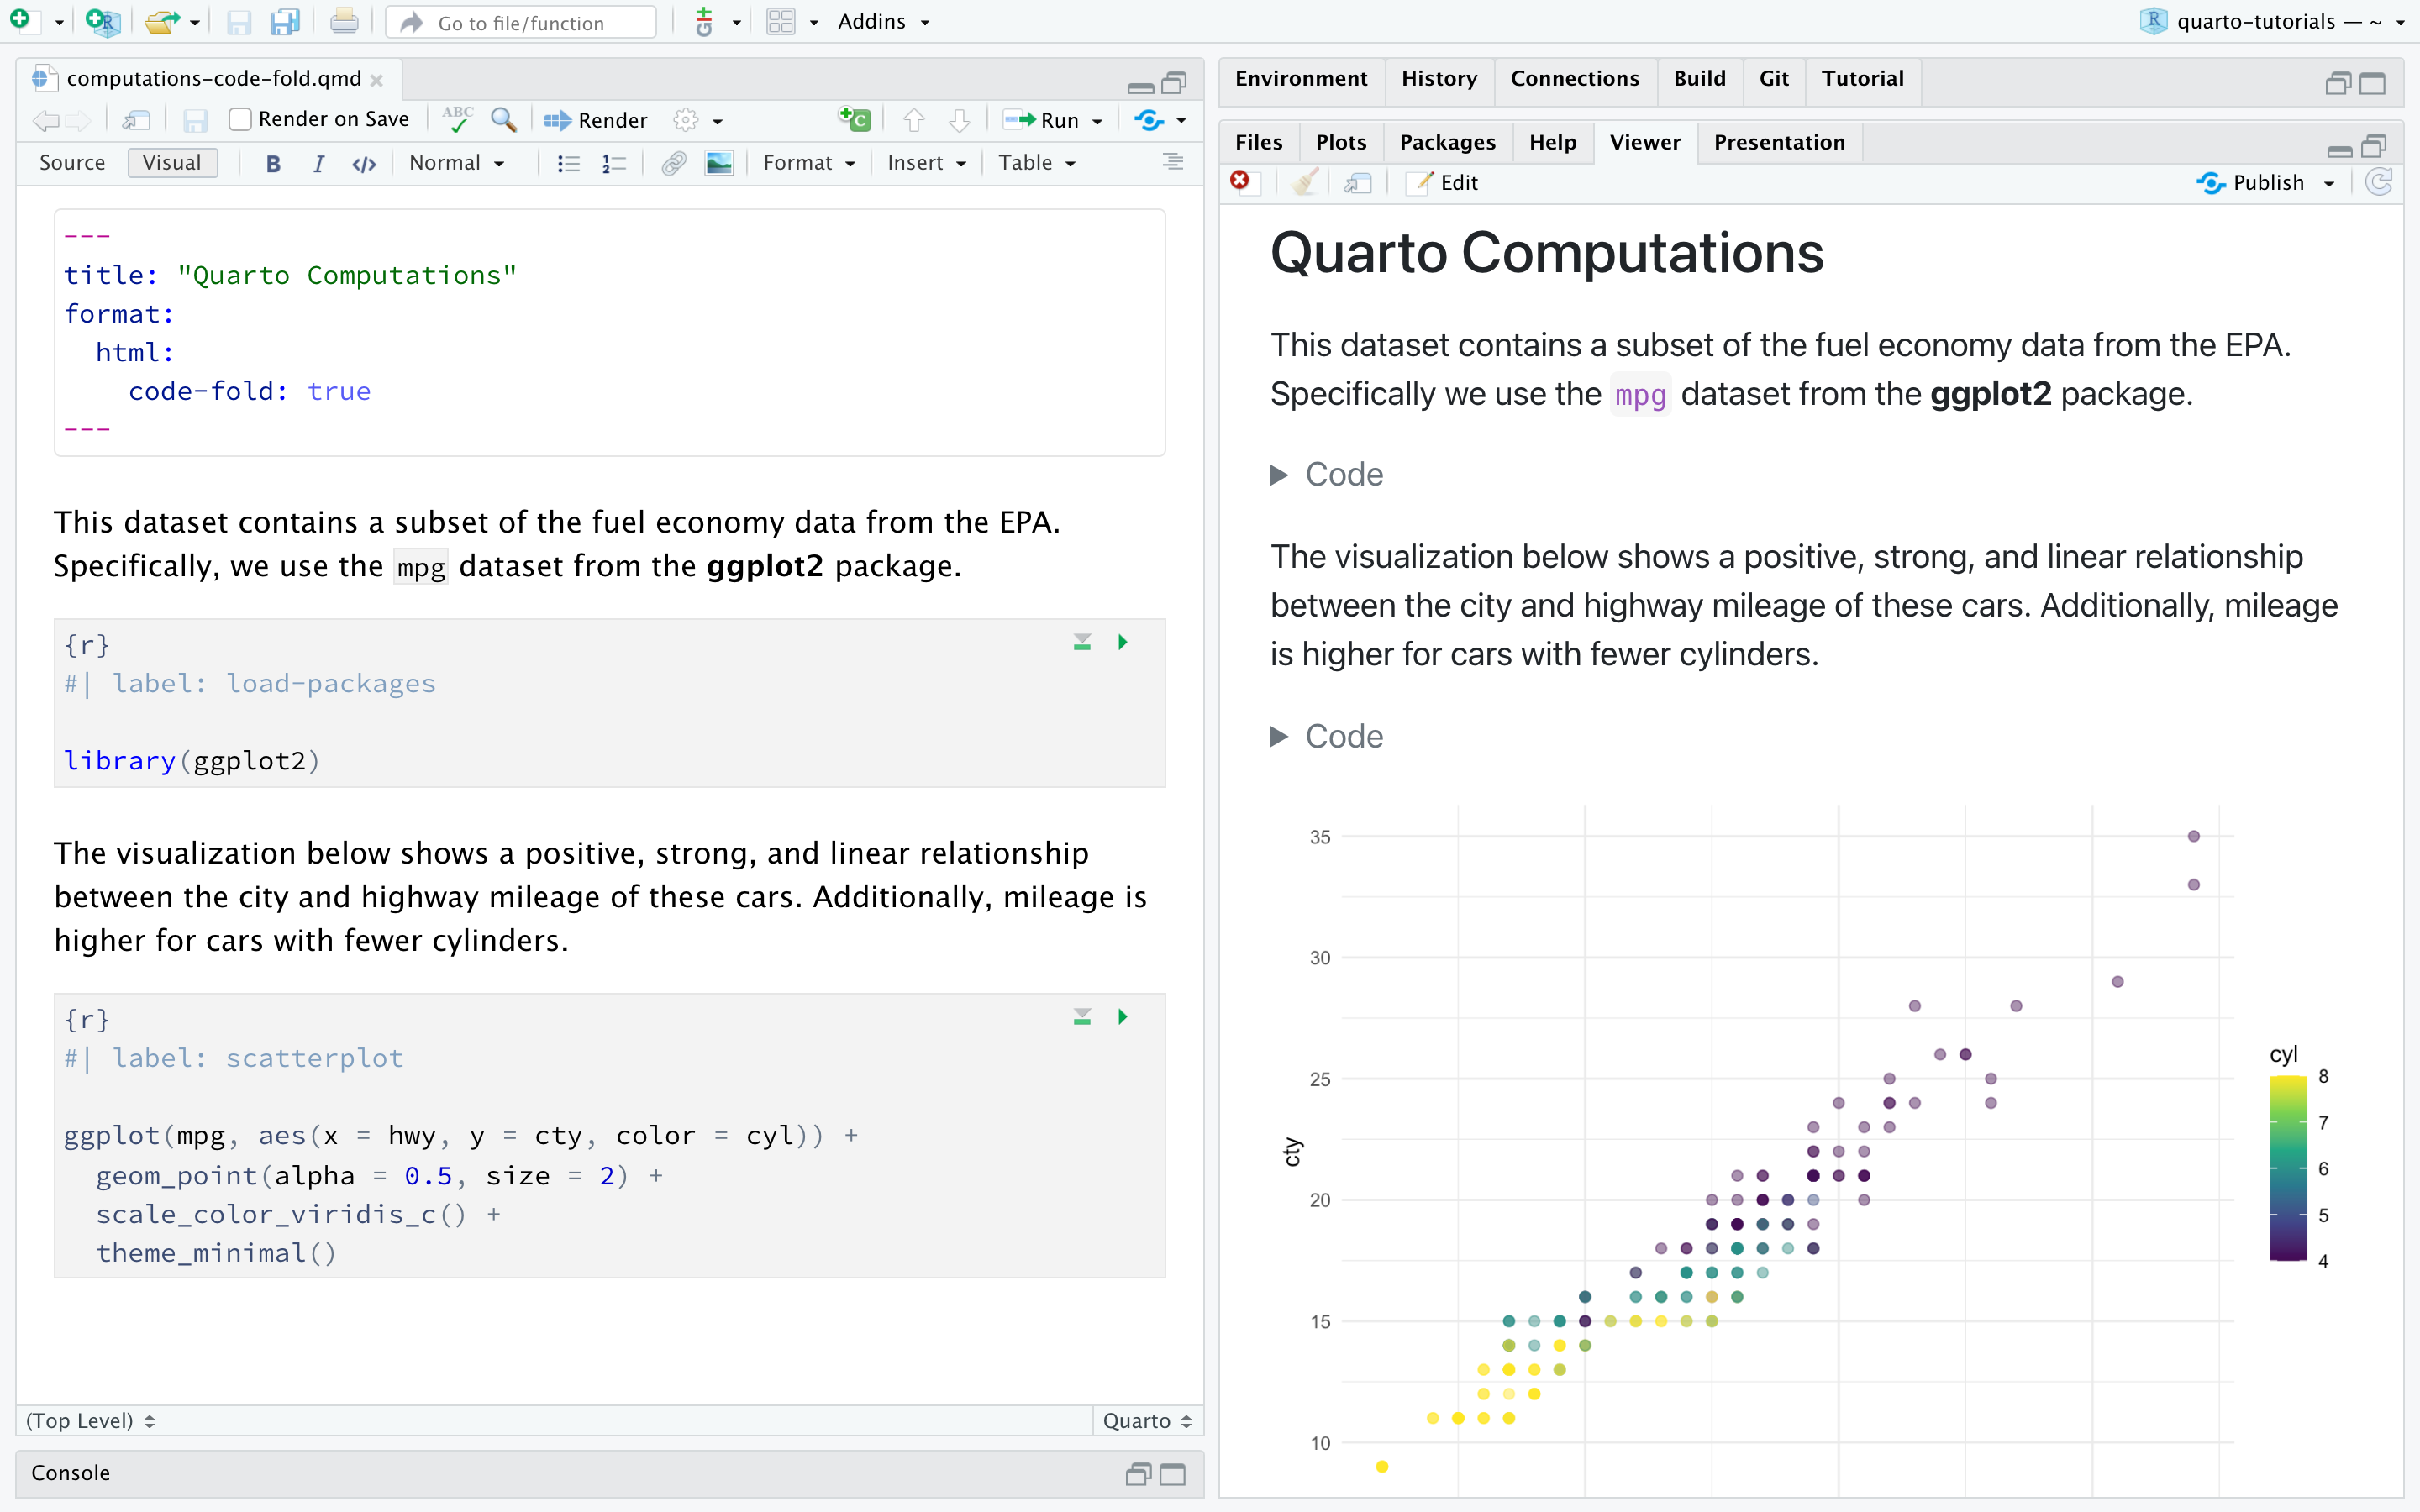 RStudio with computations.qmd open. On the right is the visual editor. The YAML has title and format defined. Title is Quarto Computations. Format is html, and code-fold option is set to true. On the right is the rendered version of the document. The title is followed by some text, which is followed by a Code widget that would expand if clicked on, which is followed by some more text, another code widget, and finally the plot. The Code widgets are folded, so the code is not visible in the rendered document.